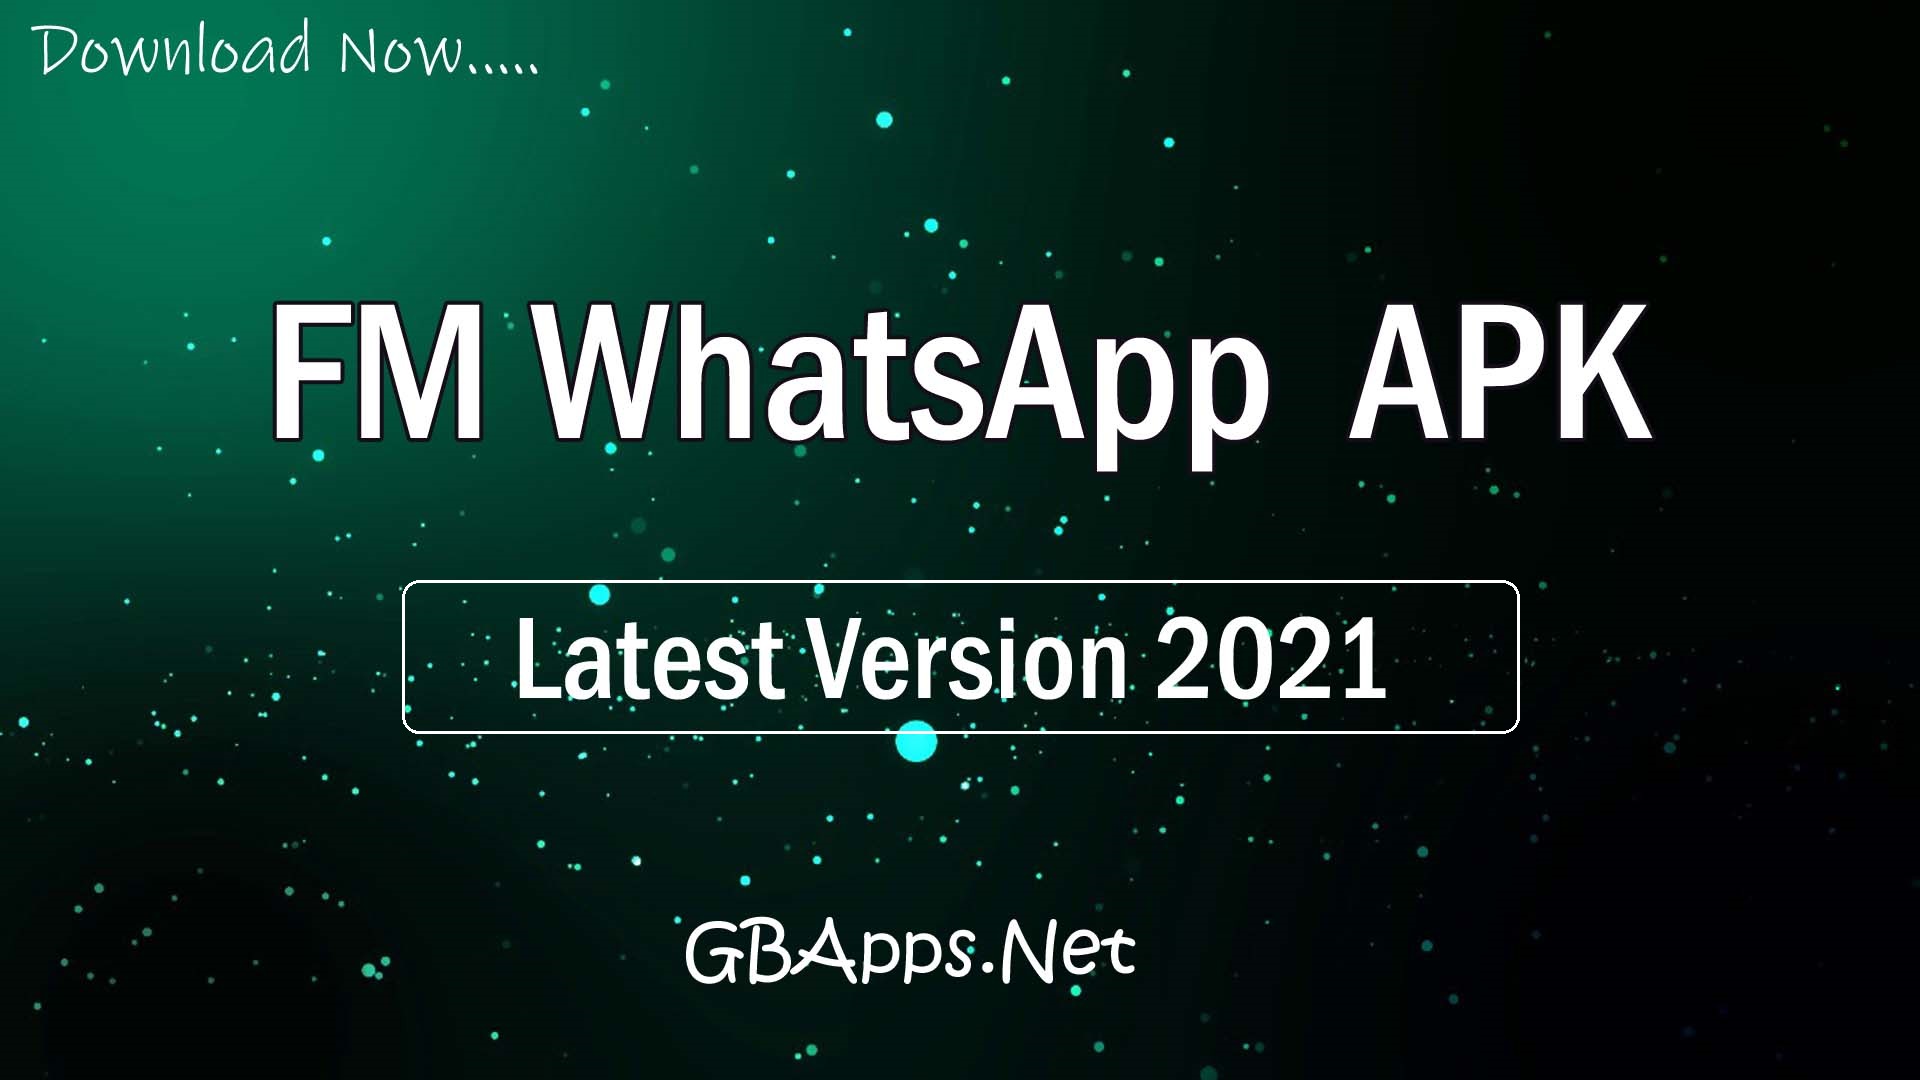 whatsapp apk download 2021 for pc